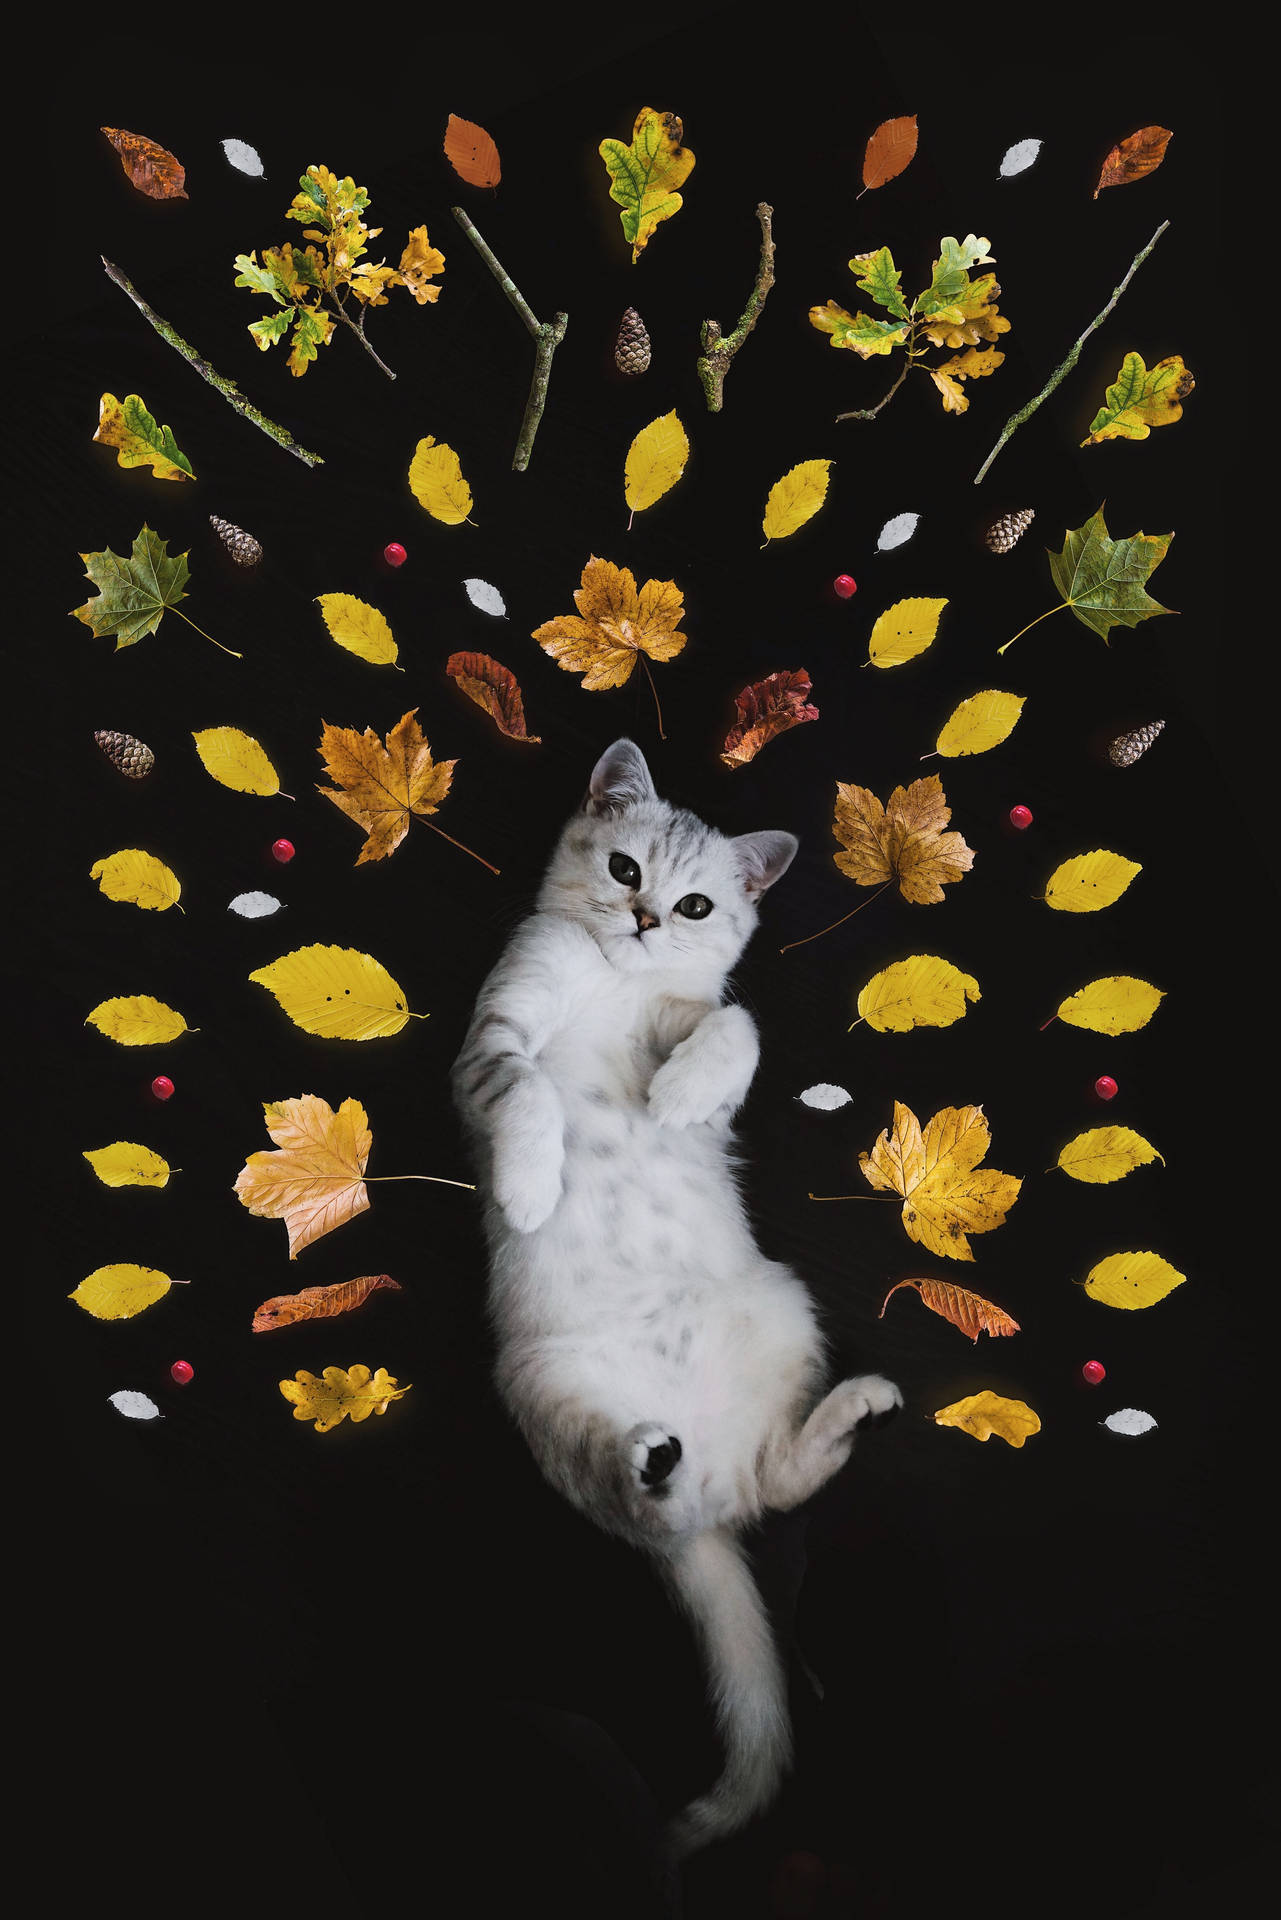 Cute Kitten Surrounded By Leaves Background